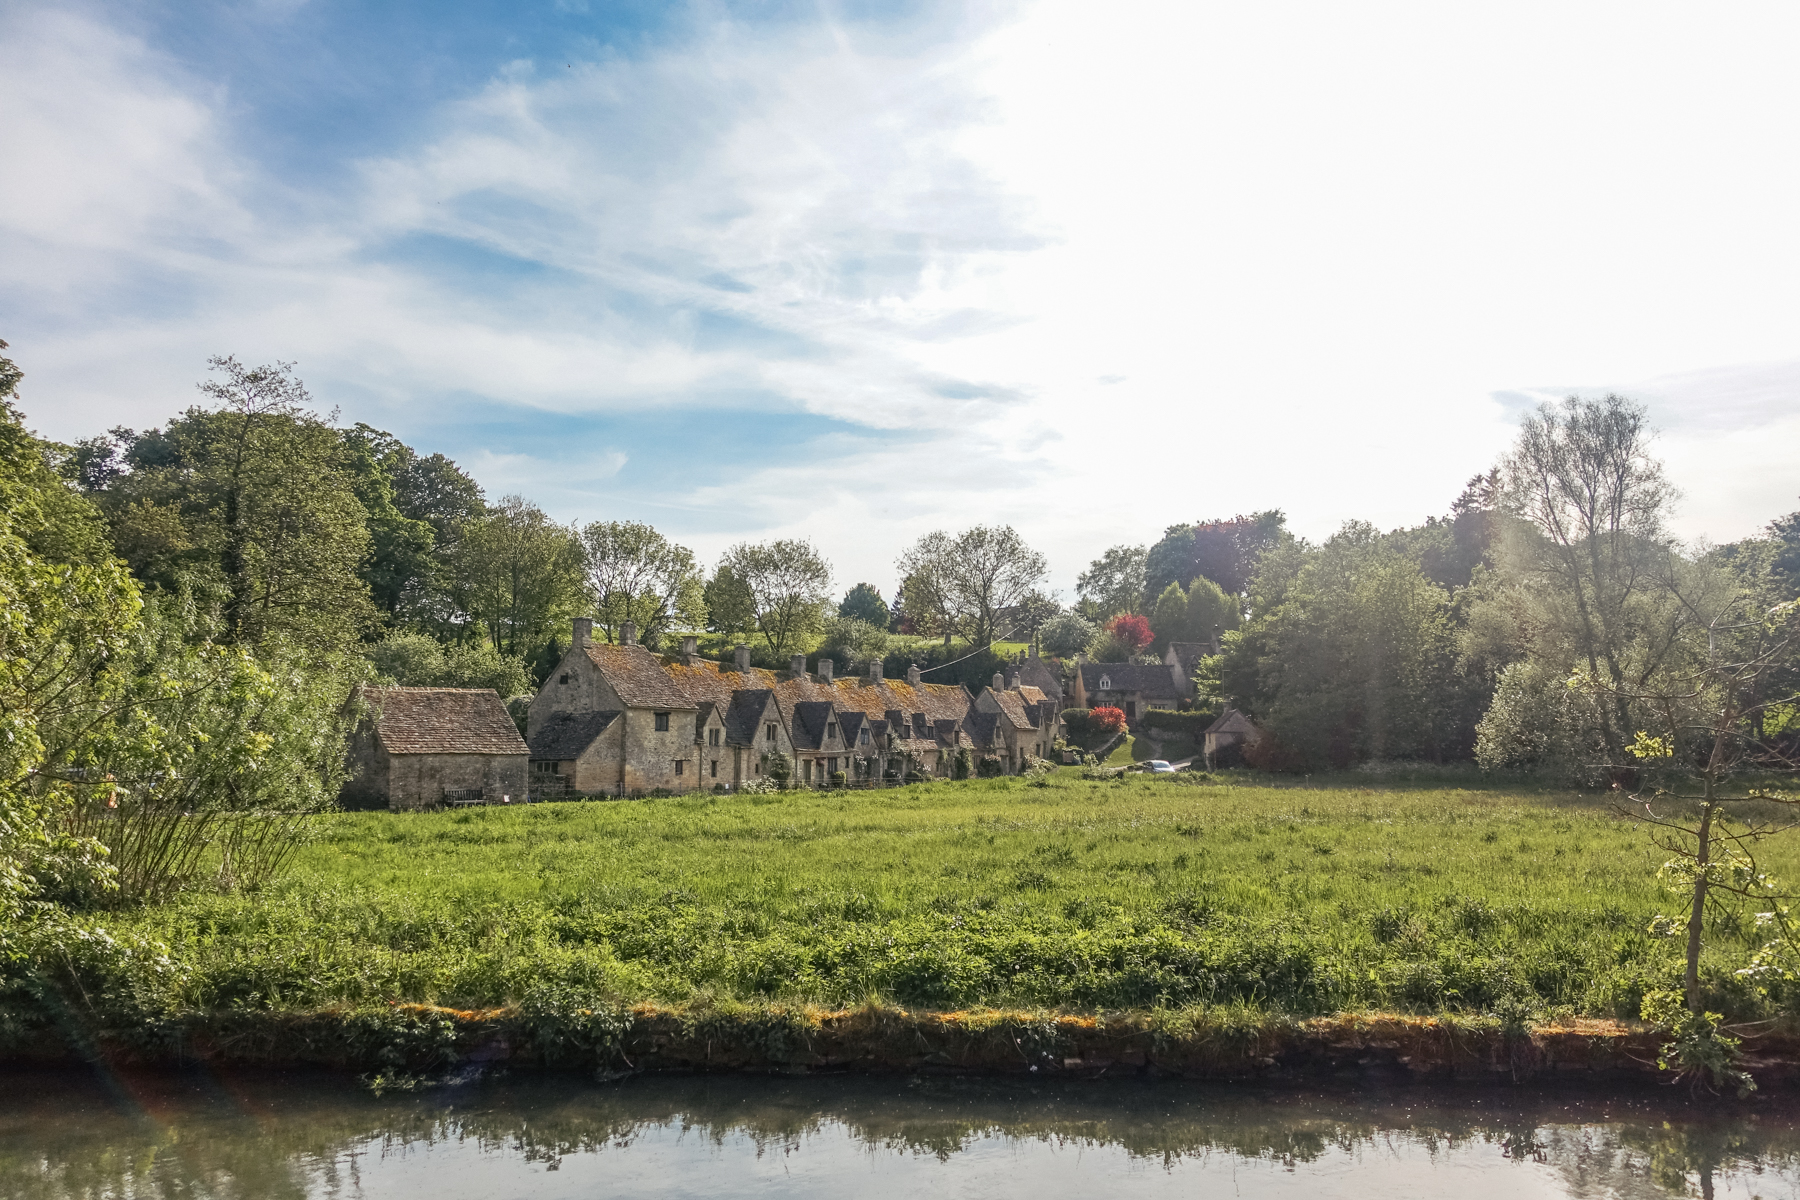 Alyssa Campanella of The A List visits Bibury in the Cotswolds